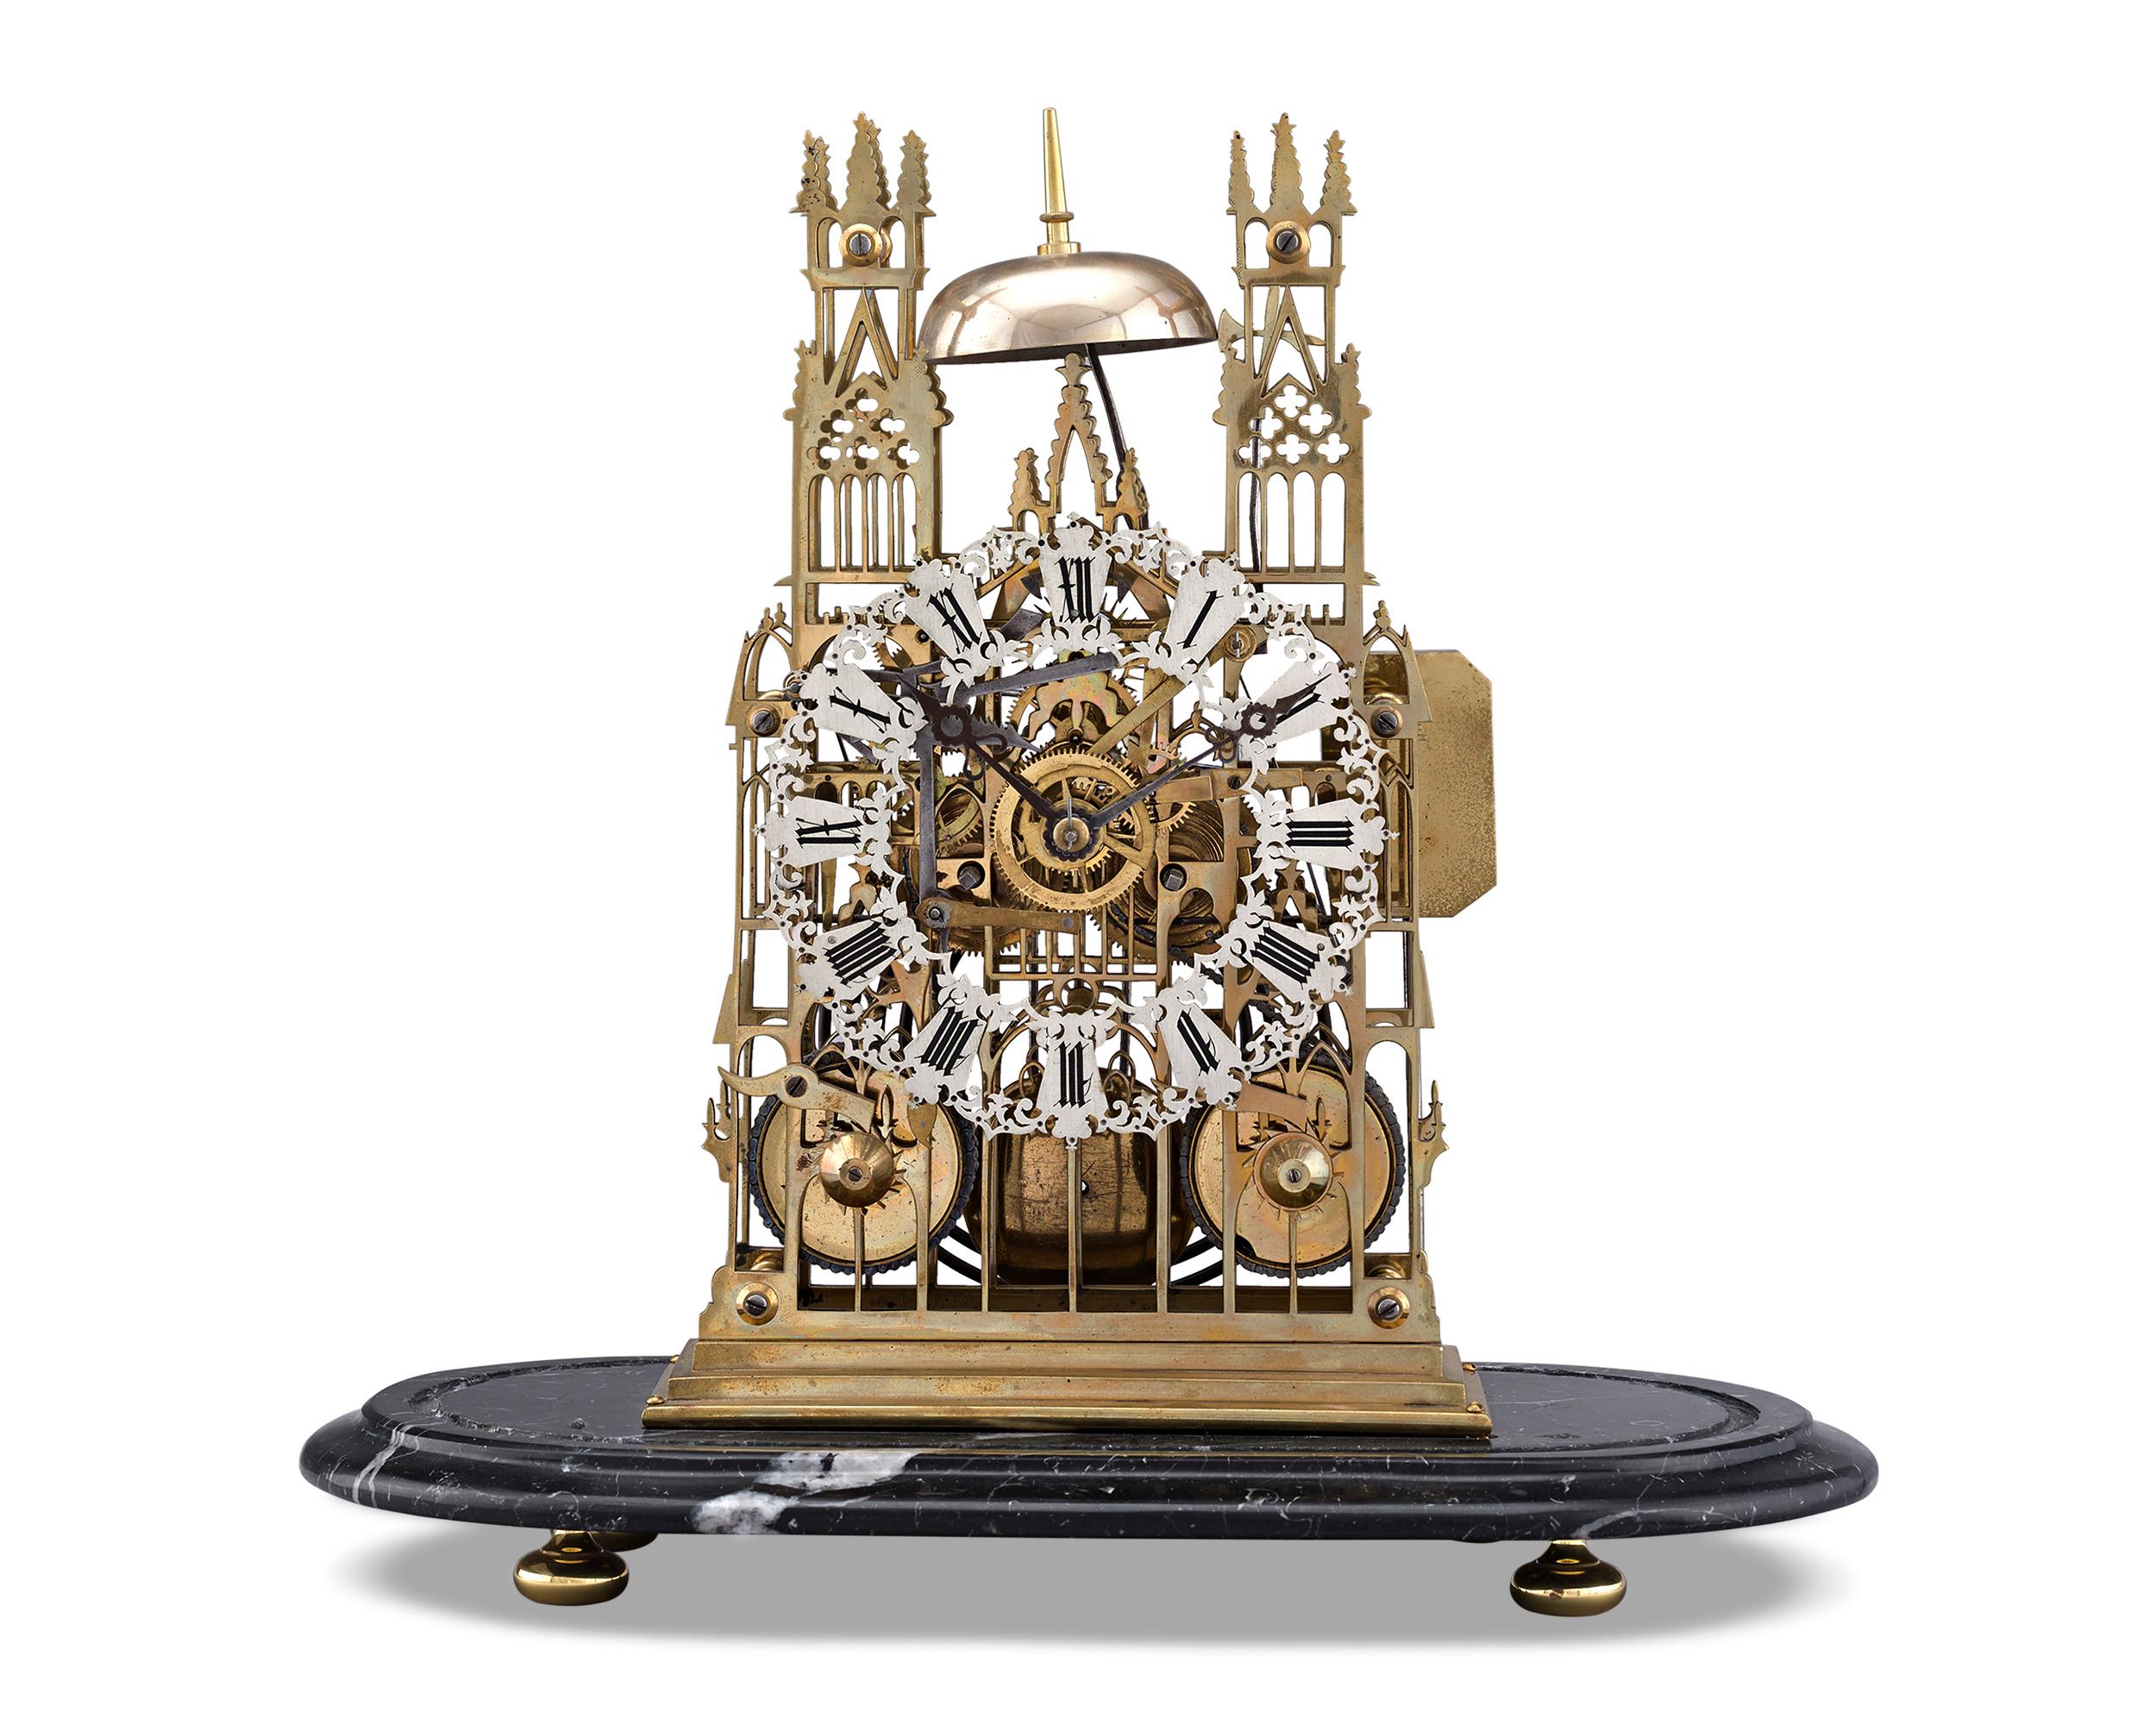 Depicting the majestic York Minster Cathedral in York, England, this remarkable Victorian brass skeleton clock is a wonderful specimen of English clockmaking attributed to J. Smith & Sons of Clerkenwell, London. Known alternatively as a 